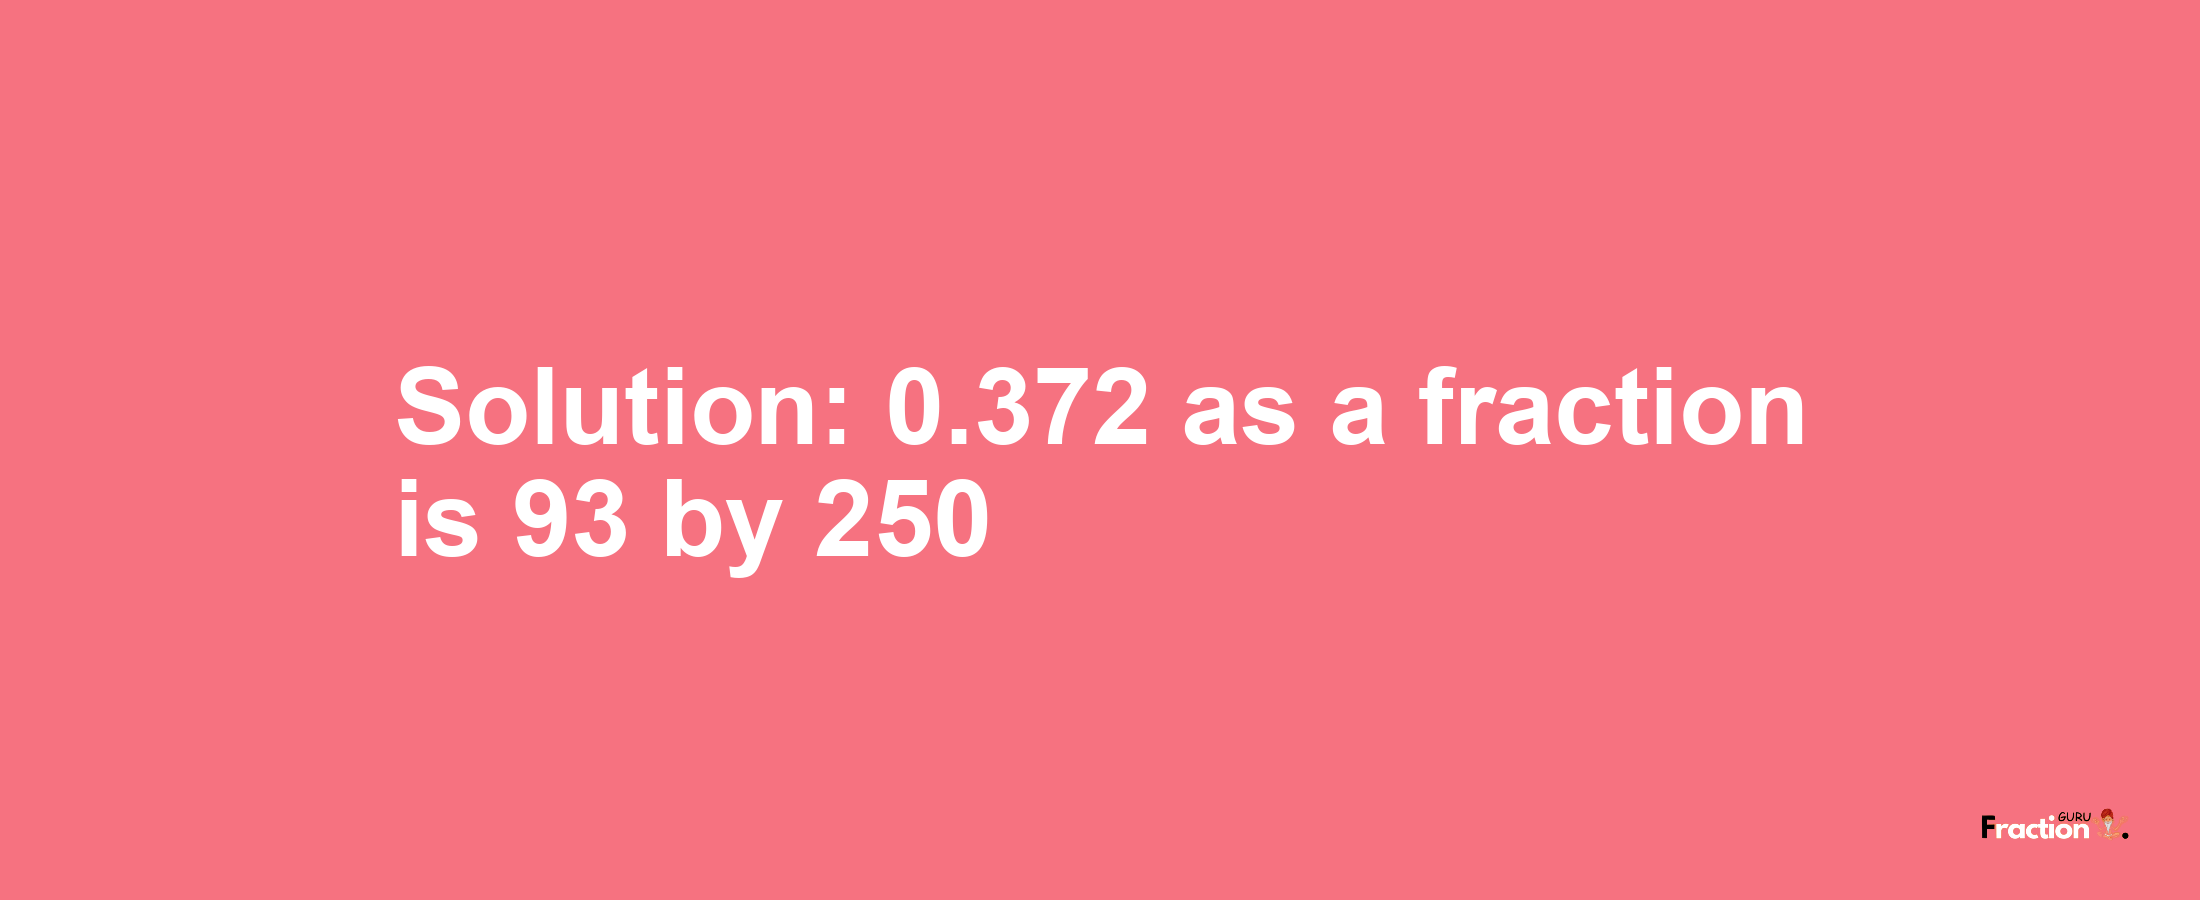 Solution:0.372 as a fraction is 93/250